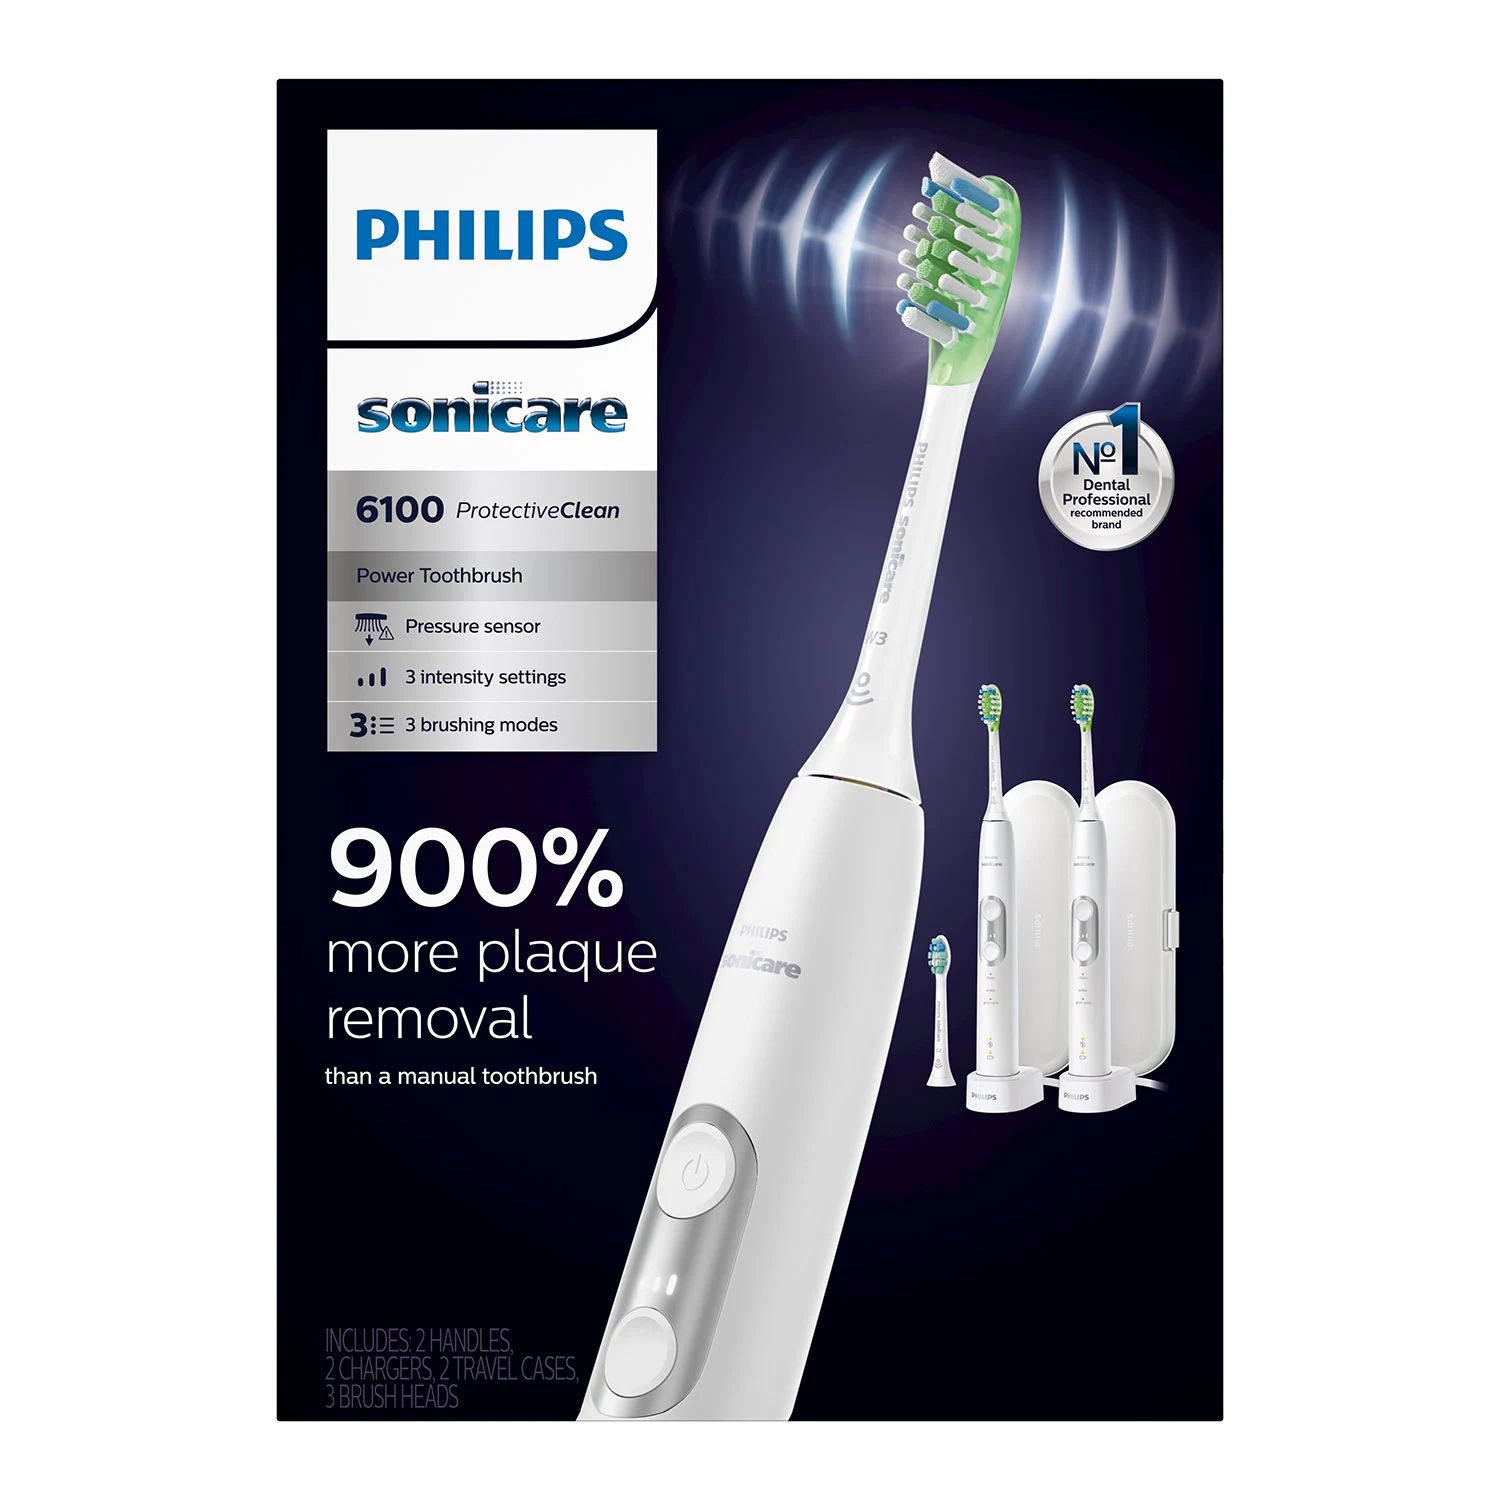 Philips Sonicare ProtectiveClean 6100 Whitening Electric Rechargeable Toothbrush, White (2 pk.) | Sam's Club